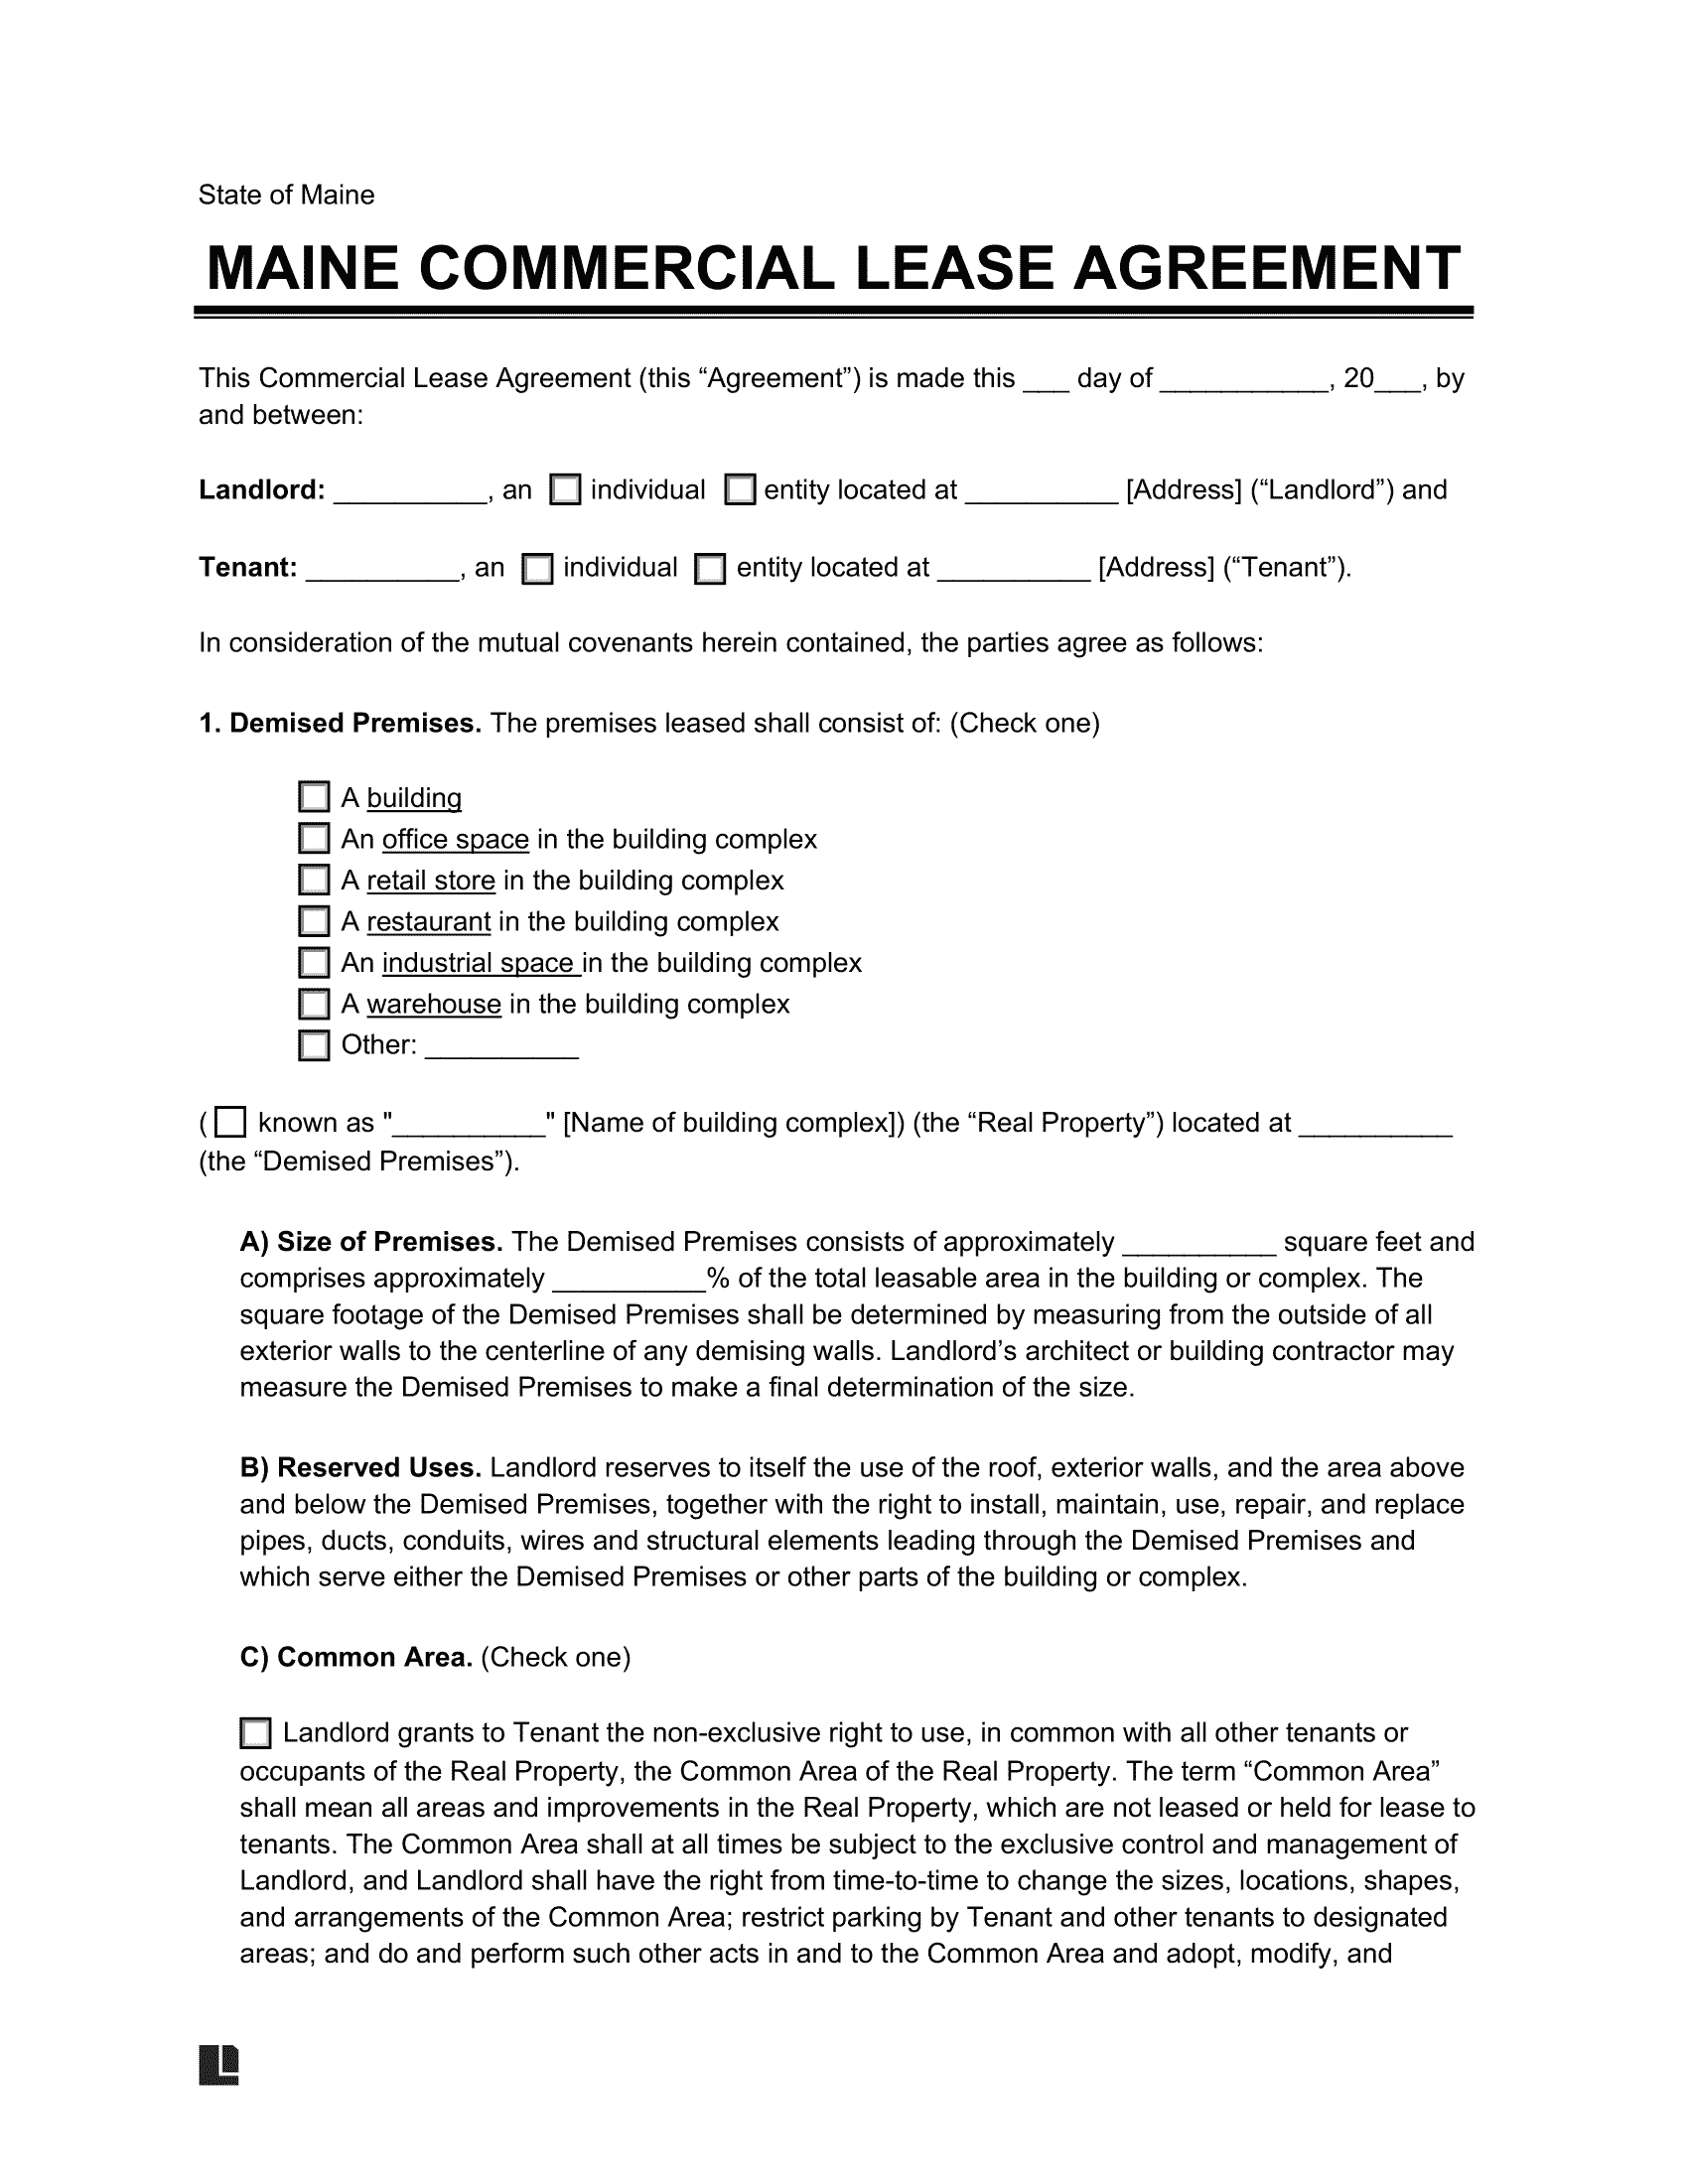 Maine Commercial Lease Agreement